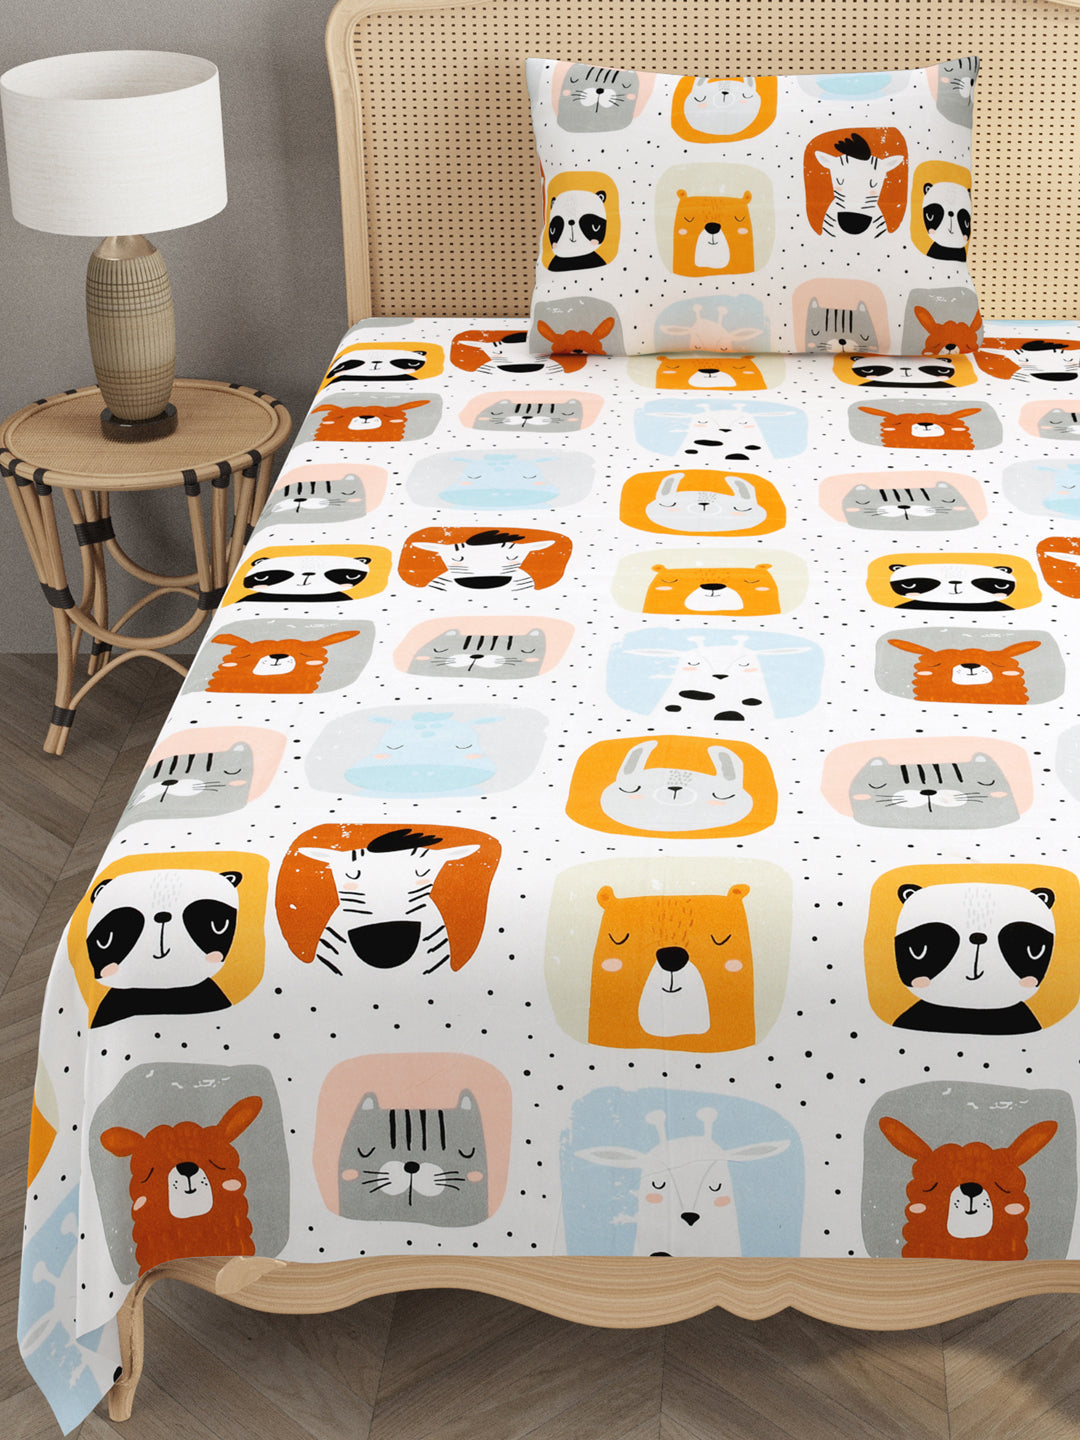 Polycotton Kids Print Single bedsheet with 1 Pillow Cover